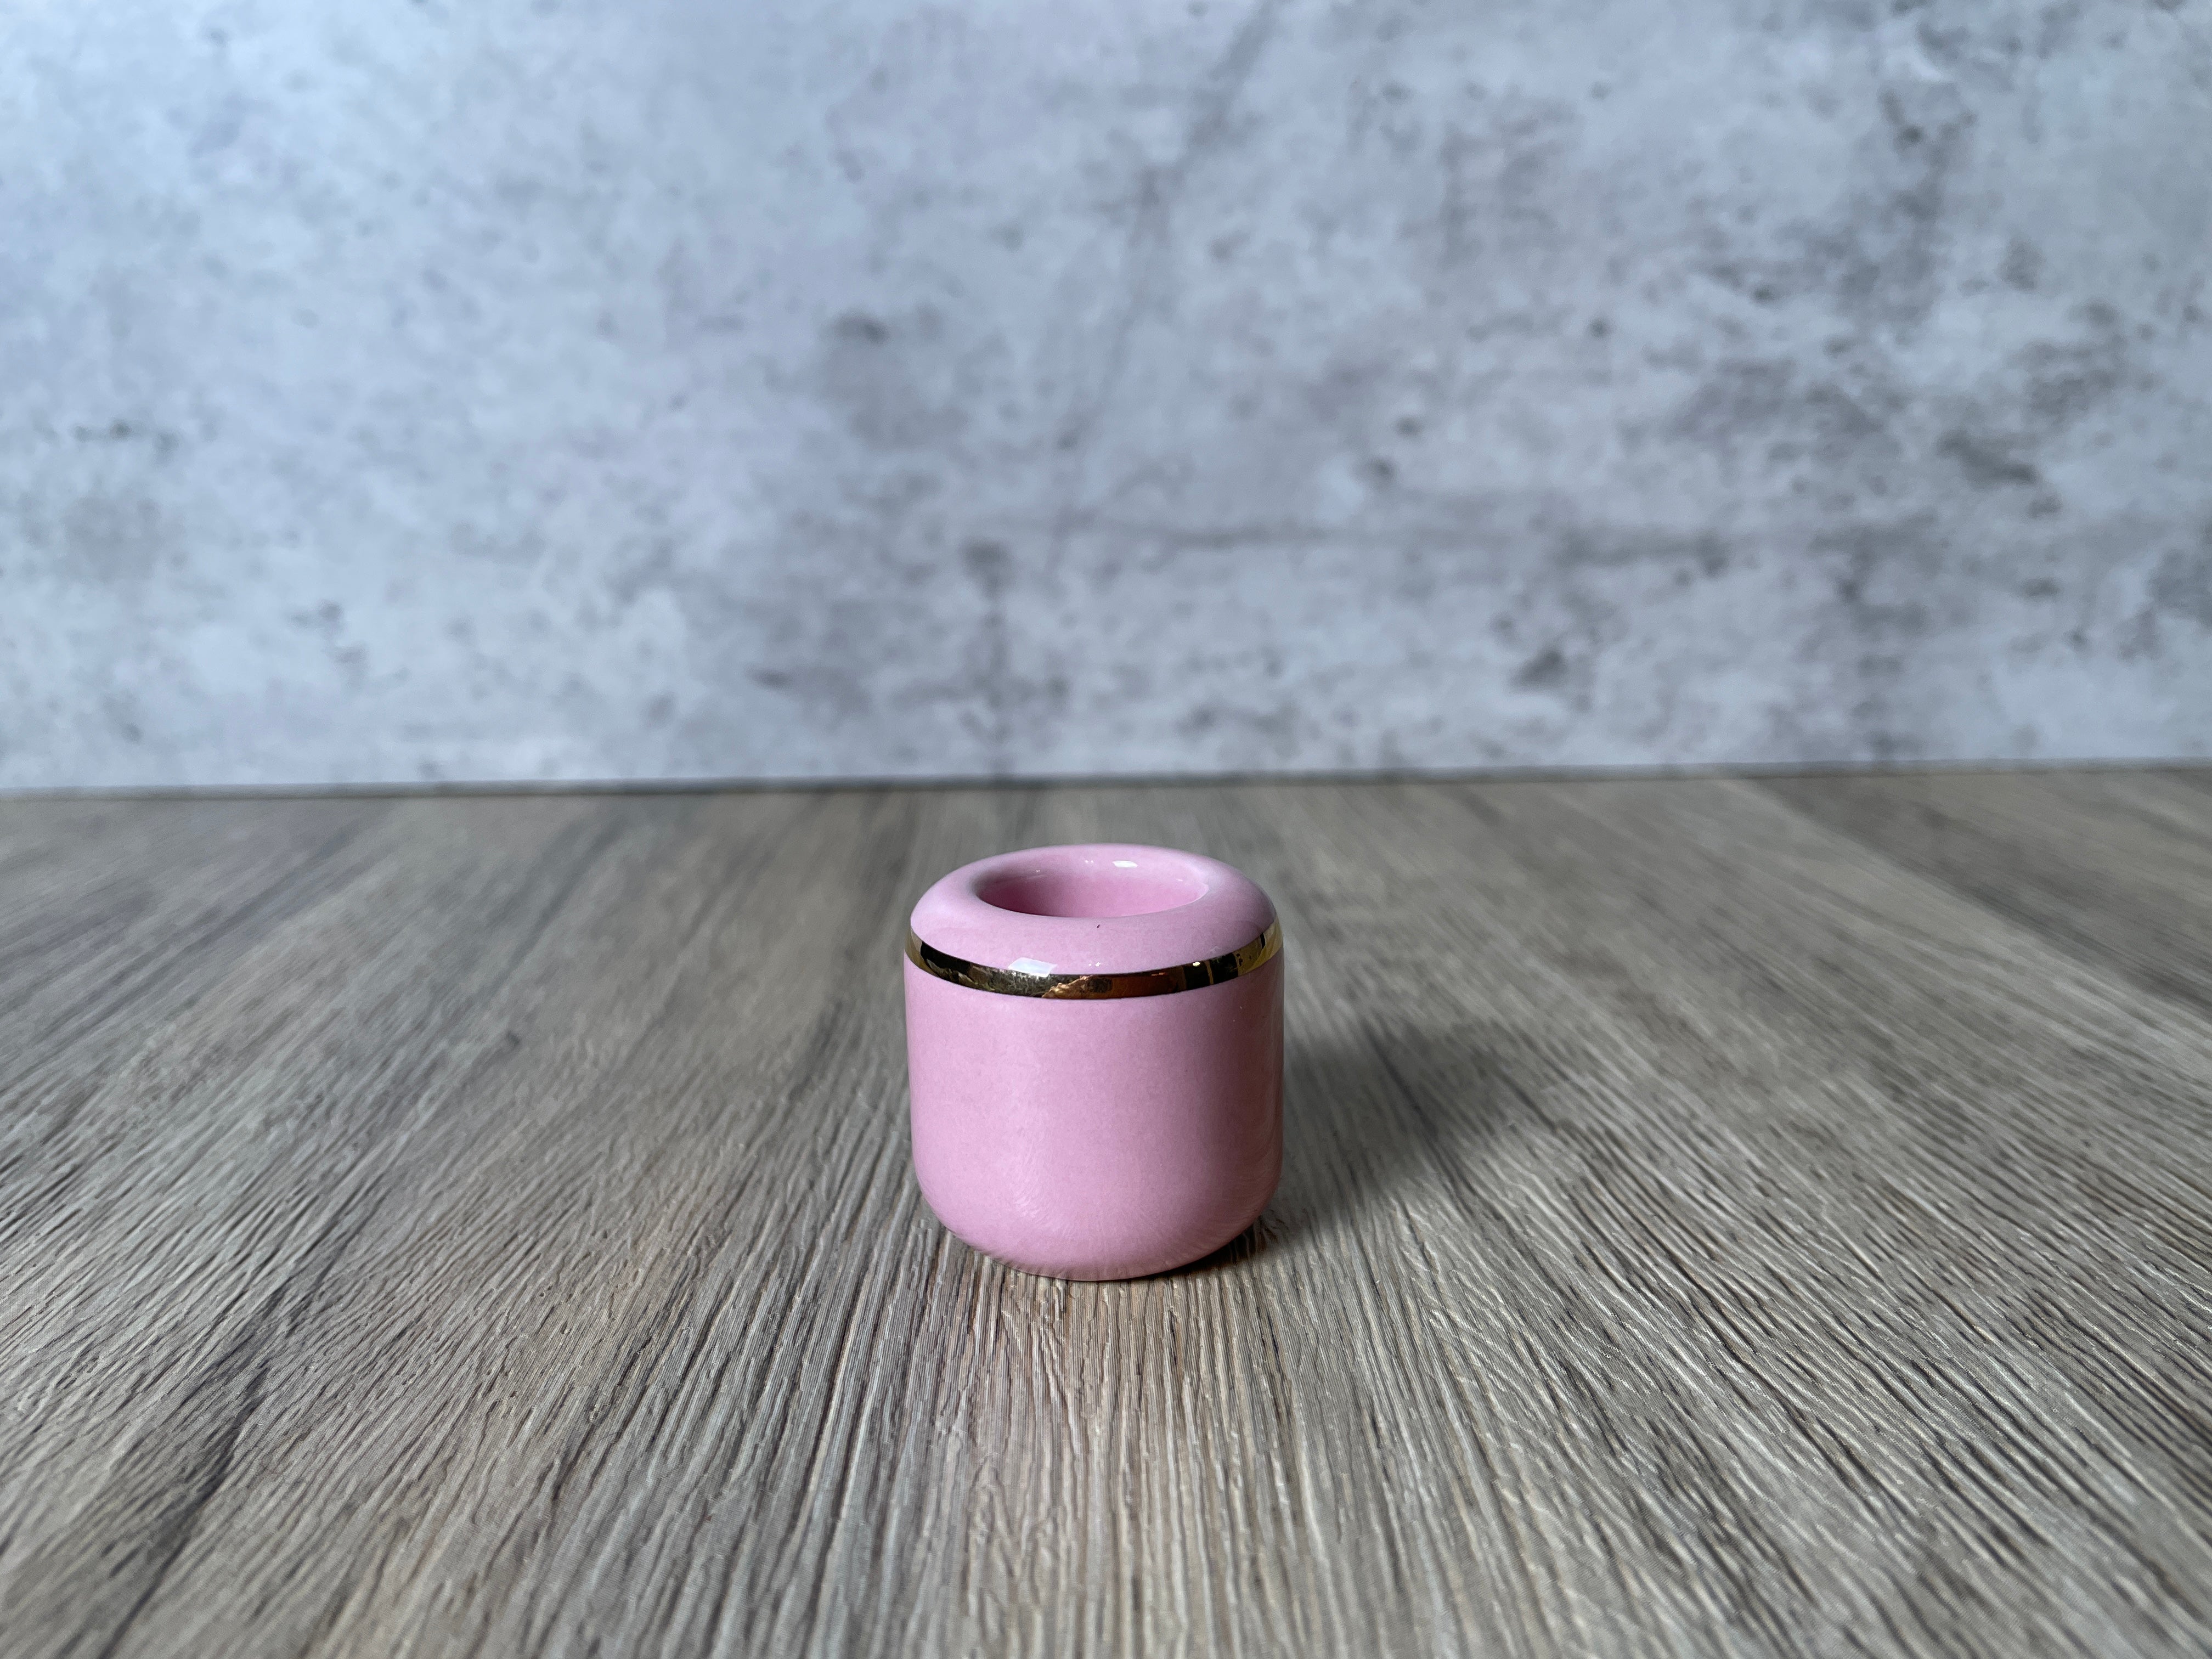 Buy Online Latest and Unique Pink Chime Candle Holder - Ceramic with Gold Band | Shop Best Spiritual Items - The Mystical Ritual